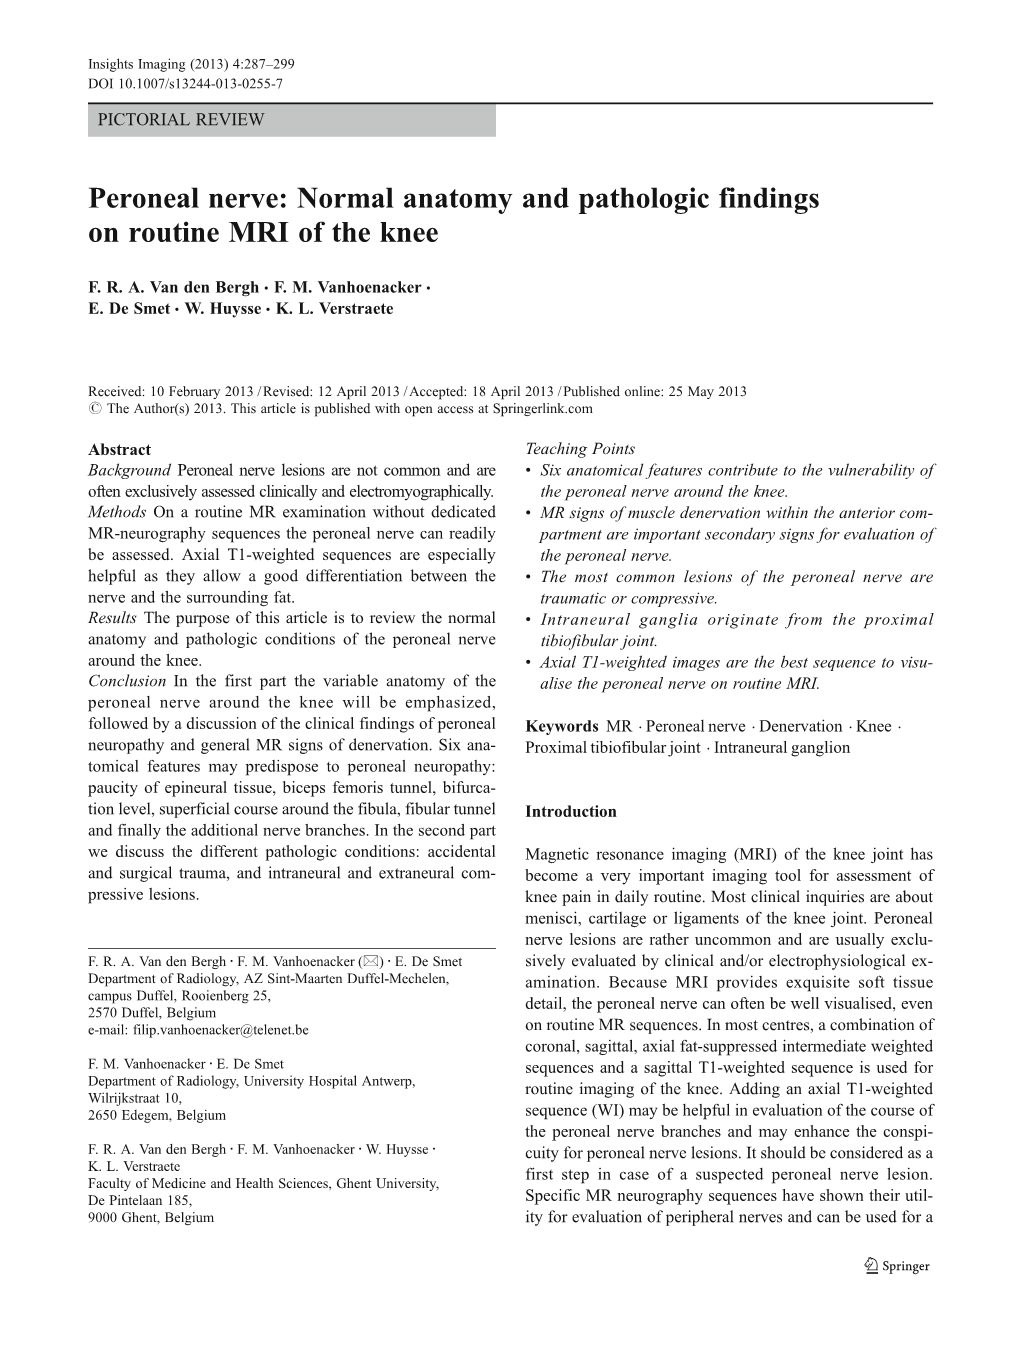 Peroneal Nerve: Normal Anatomy and Pathologic Findings on Routine MRI of the Knee